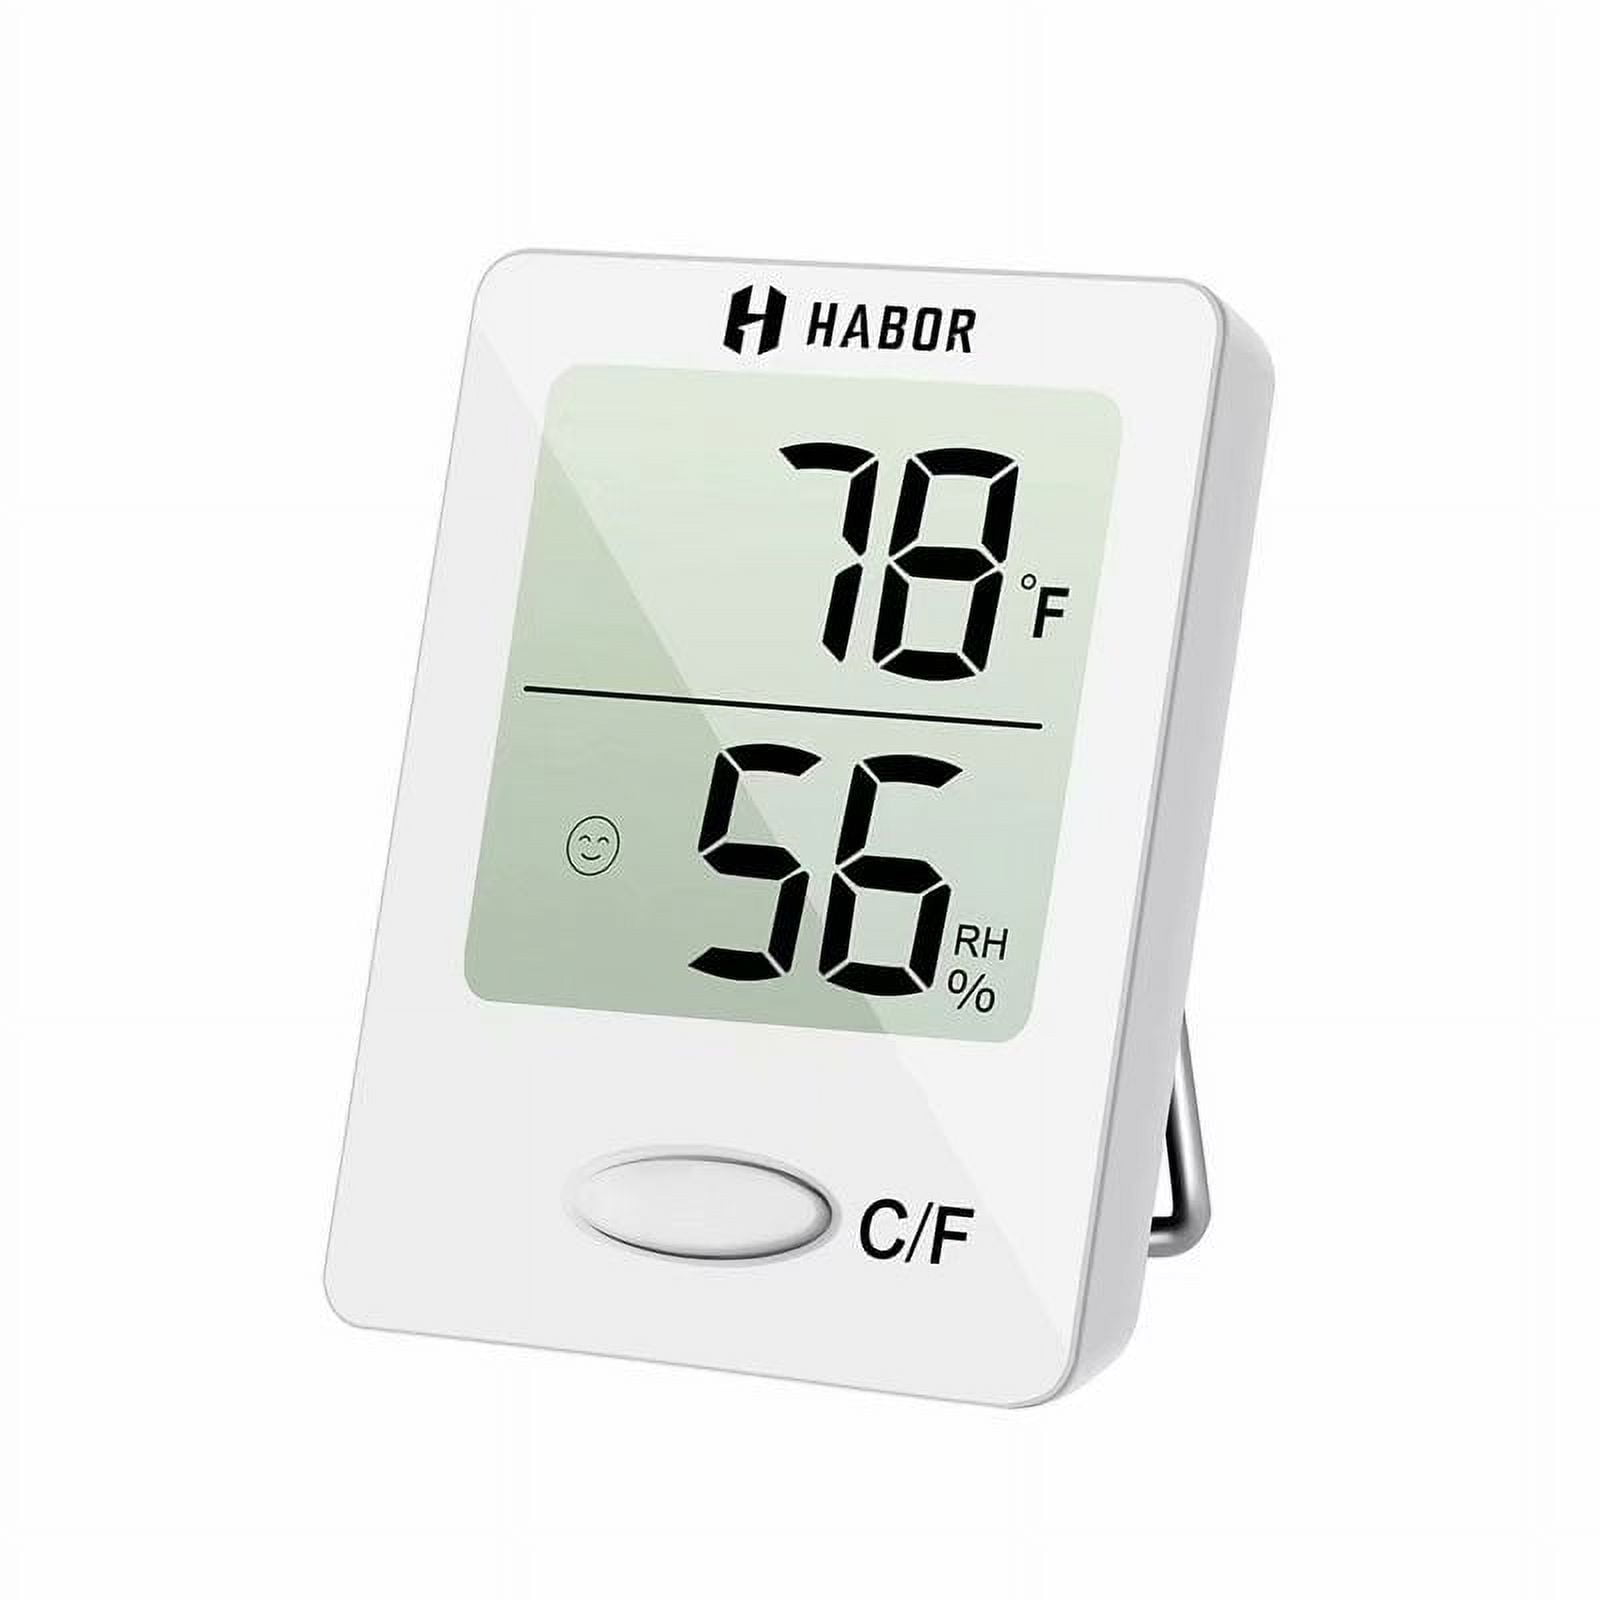 Habor Digital Hygrometer Indoor Thermometer, Humidity Gauge Indicator Room  Thermometer, Accurate Temperature Humidity Monitor Meter,white 